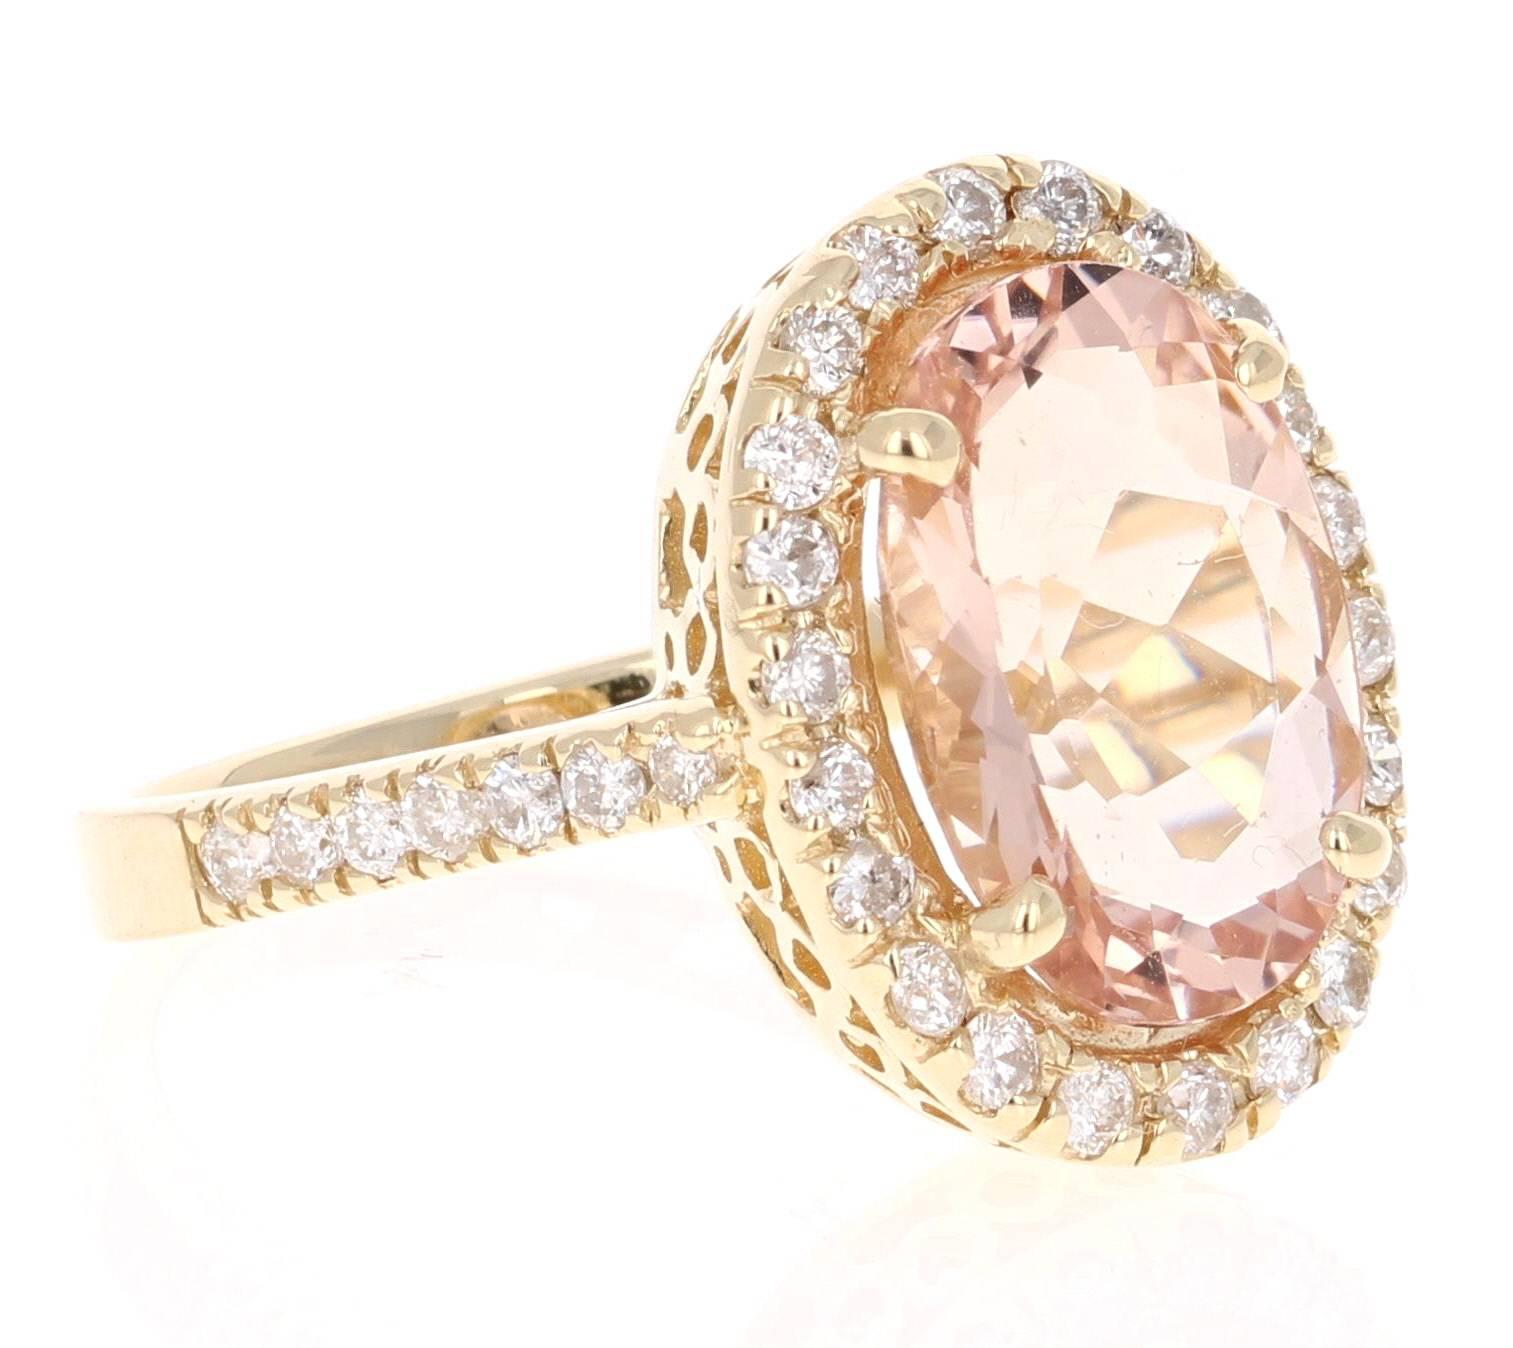 Beautiful and eye-catching 4.59 Carat Oval Cut Morganite Diamond Yellow Gold Cocktail Ring!

This Ring has a 3.95 Carat Oval Cut Morganite in the center of the Ring and is surrounded by 36 Round Cut Diamonds that weigh 0.64 Carats.   The Clarity of